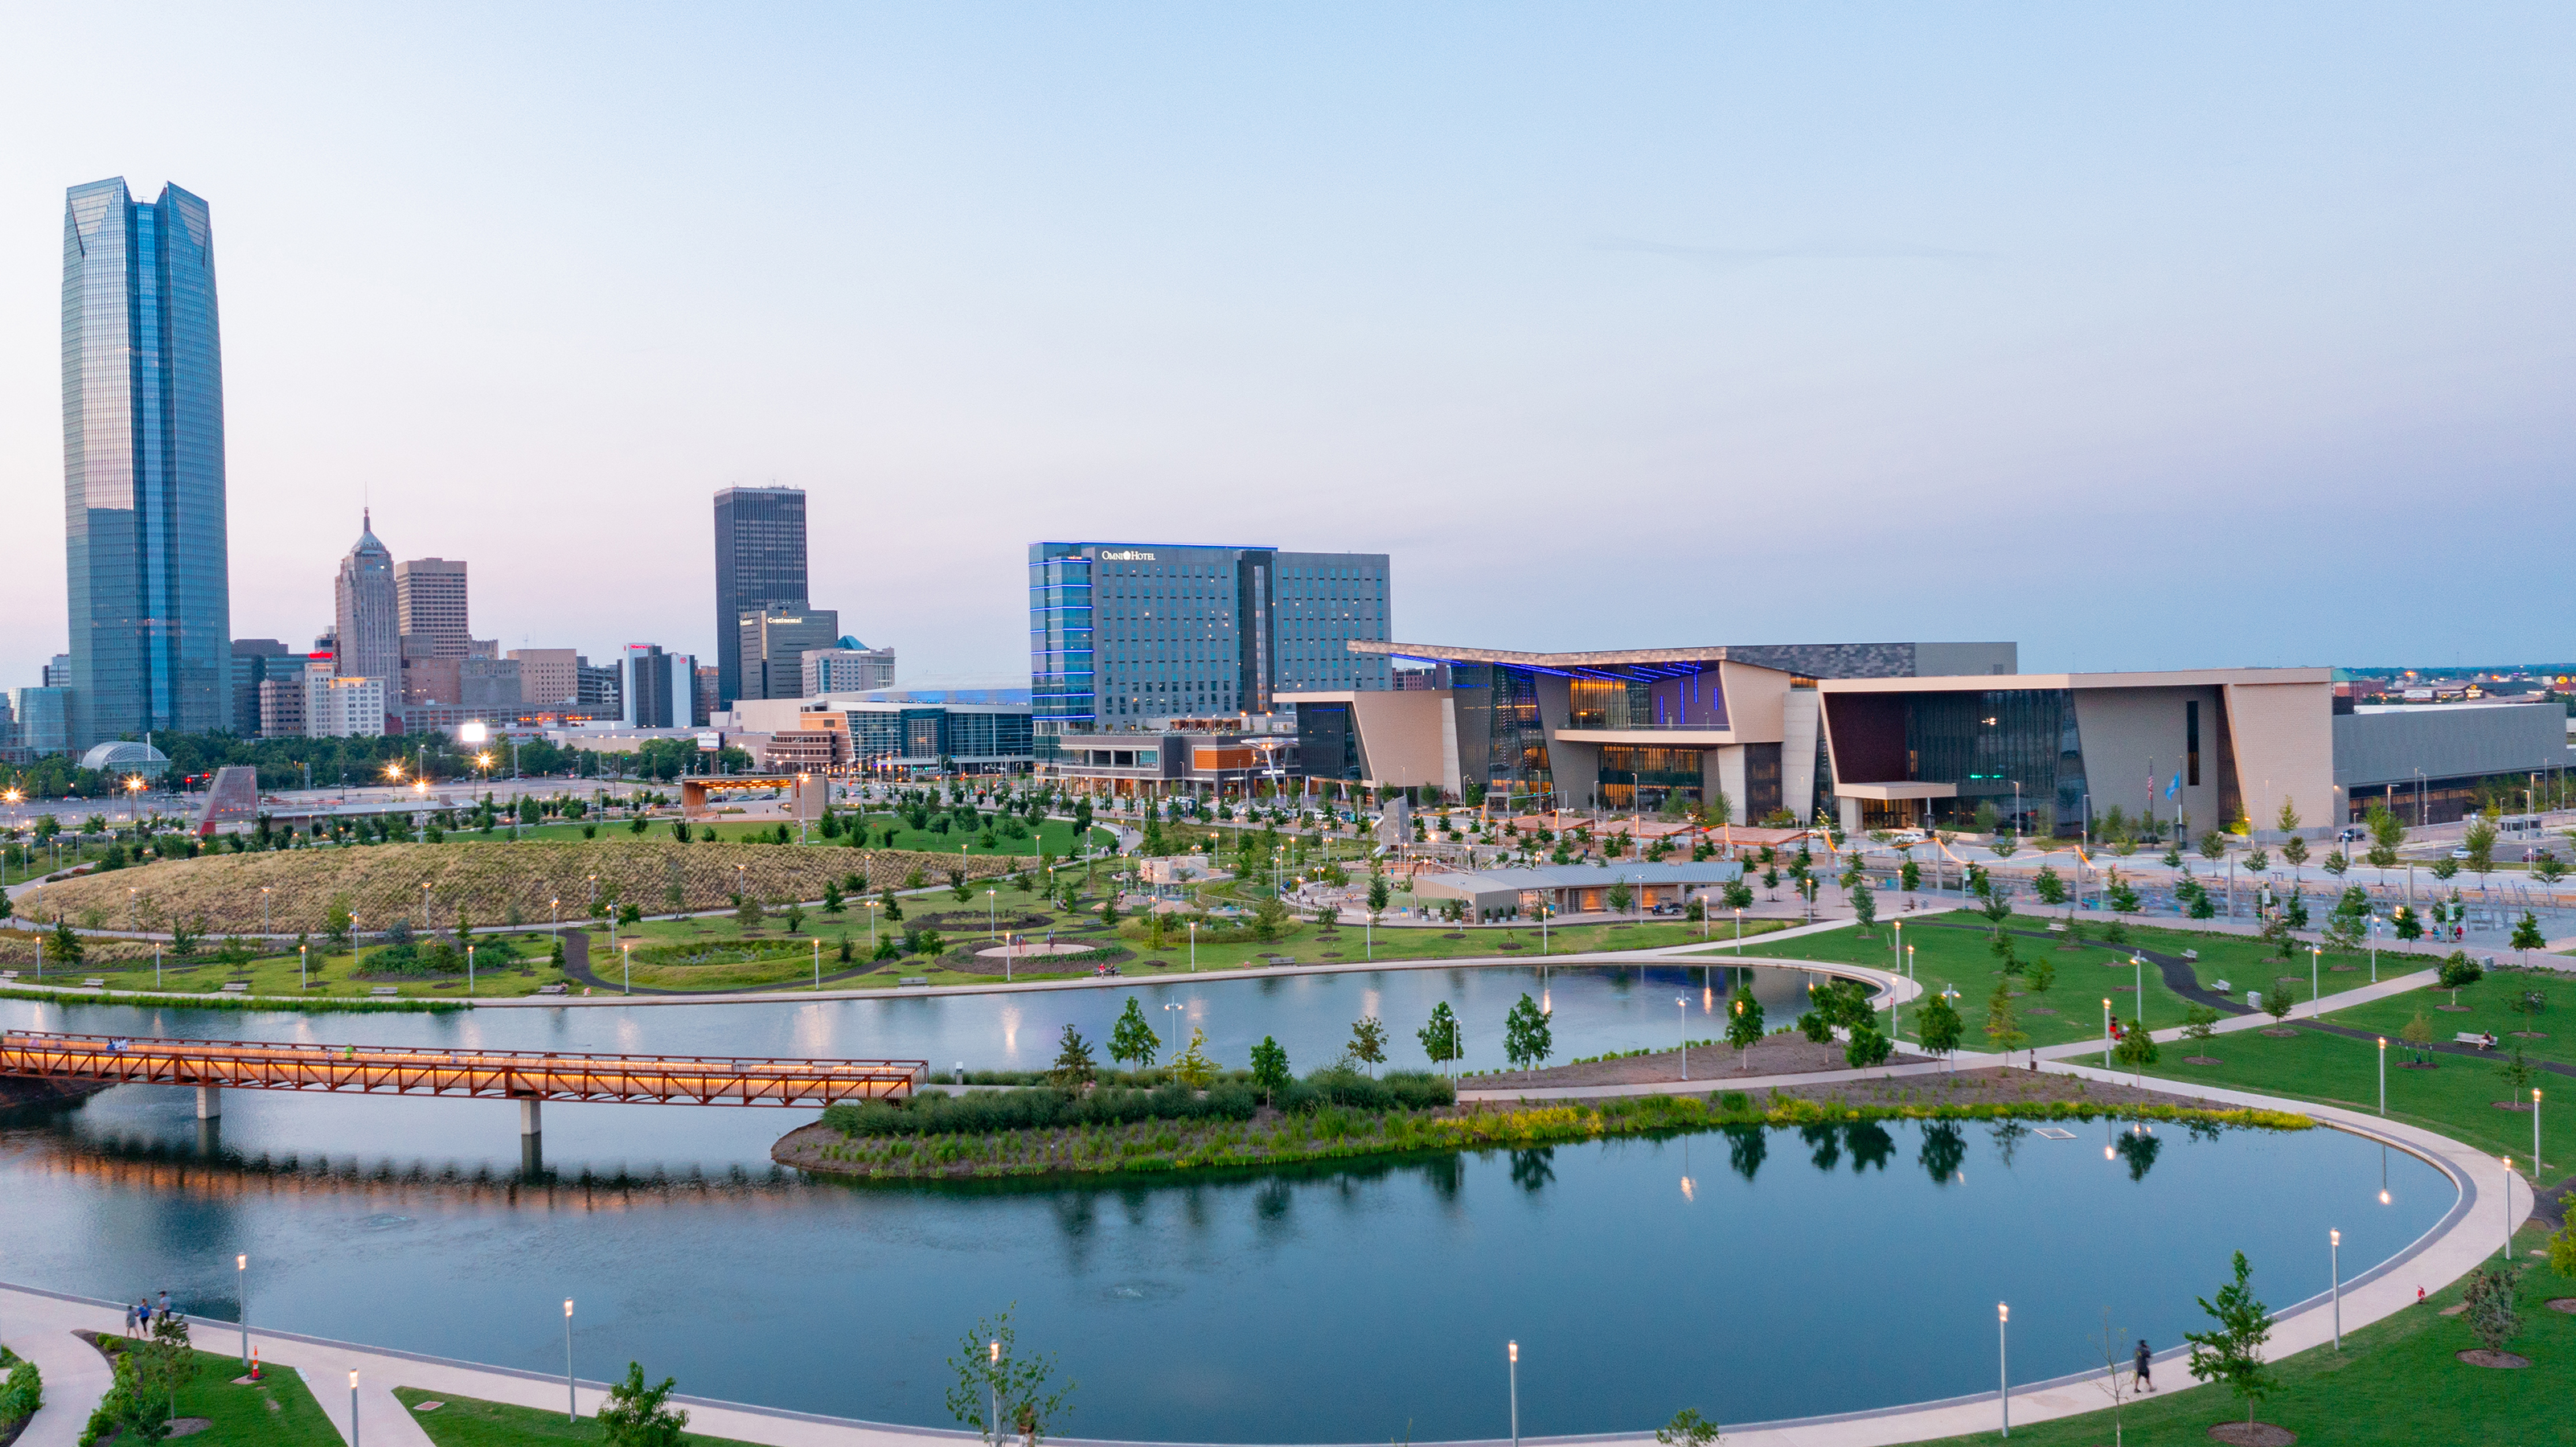 The view of the Oklahoma City skyline from above Scissortail Park in the capital city. The park is named for the state bird of Oklahoma. Photo courtesy Visit OKC.